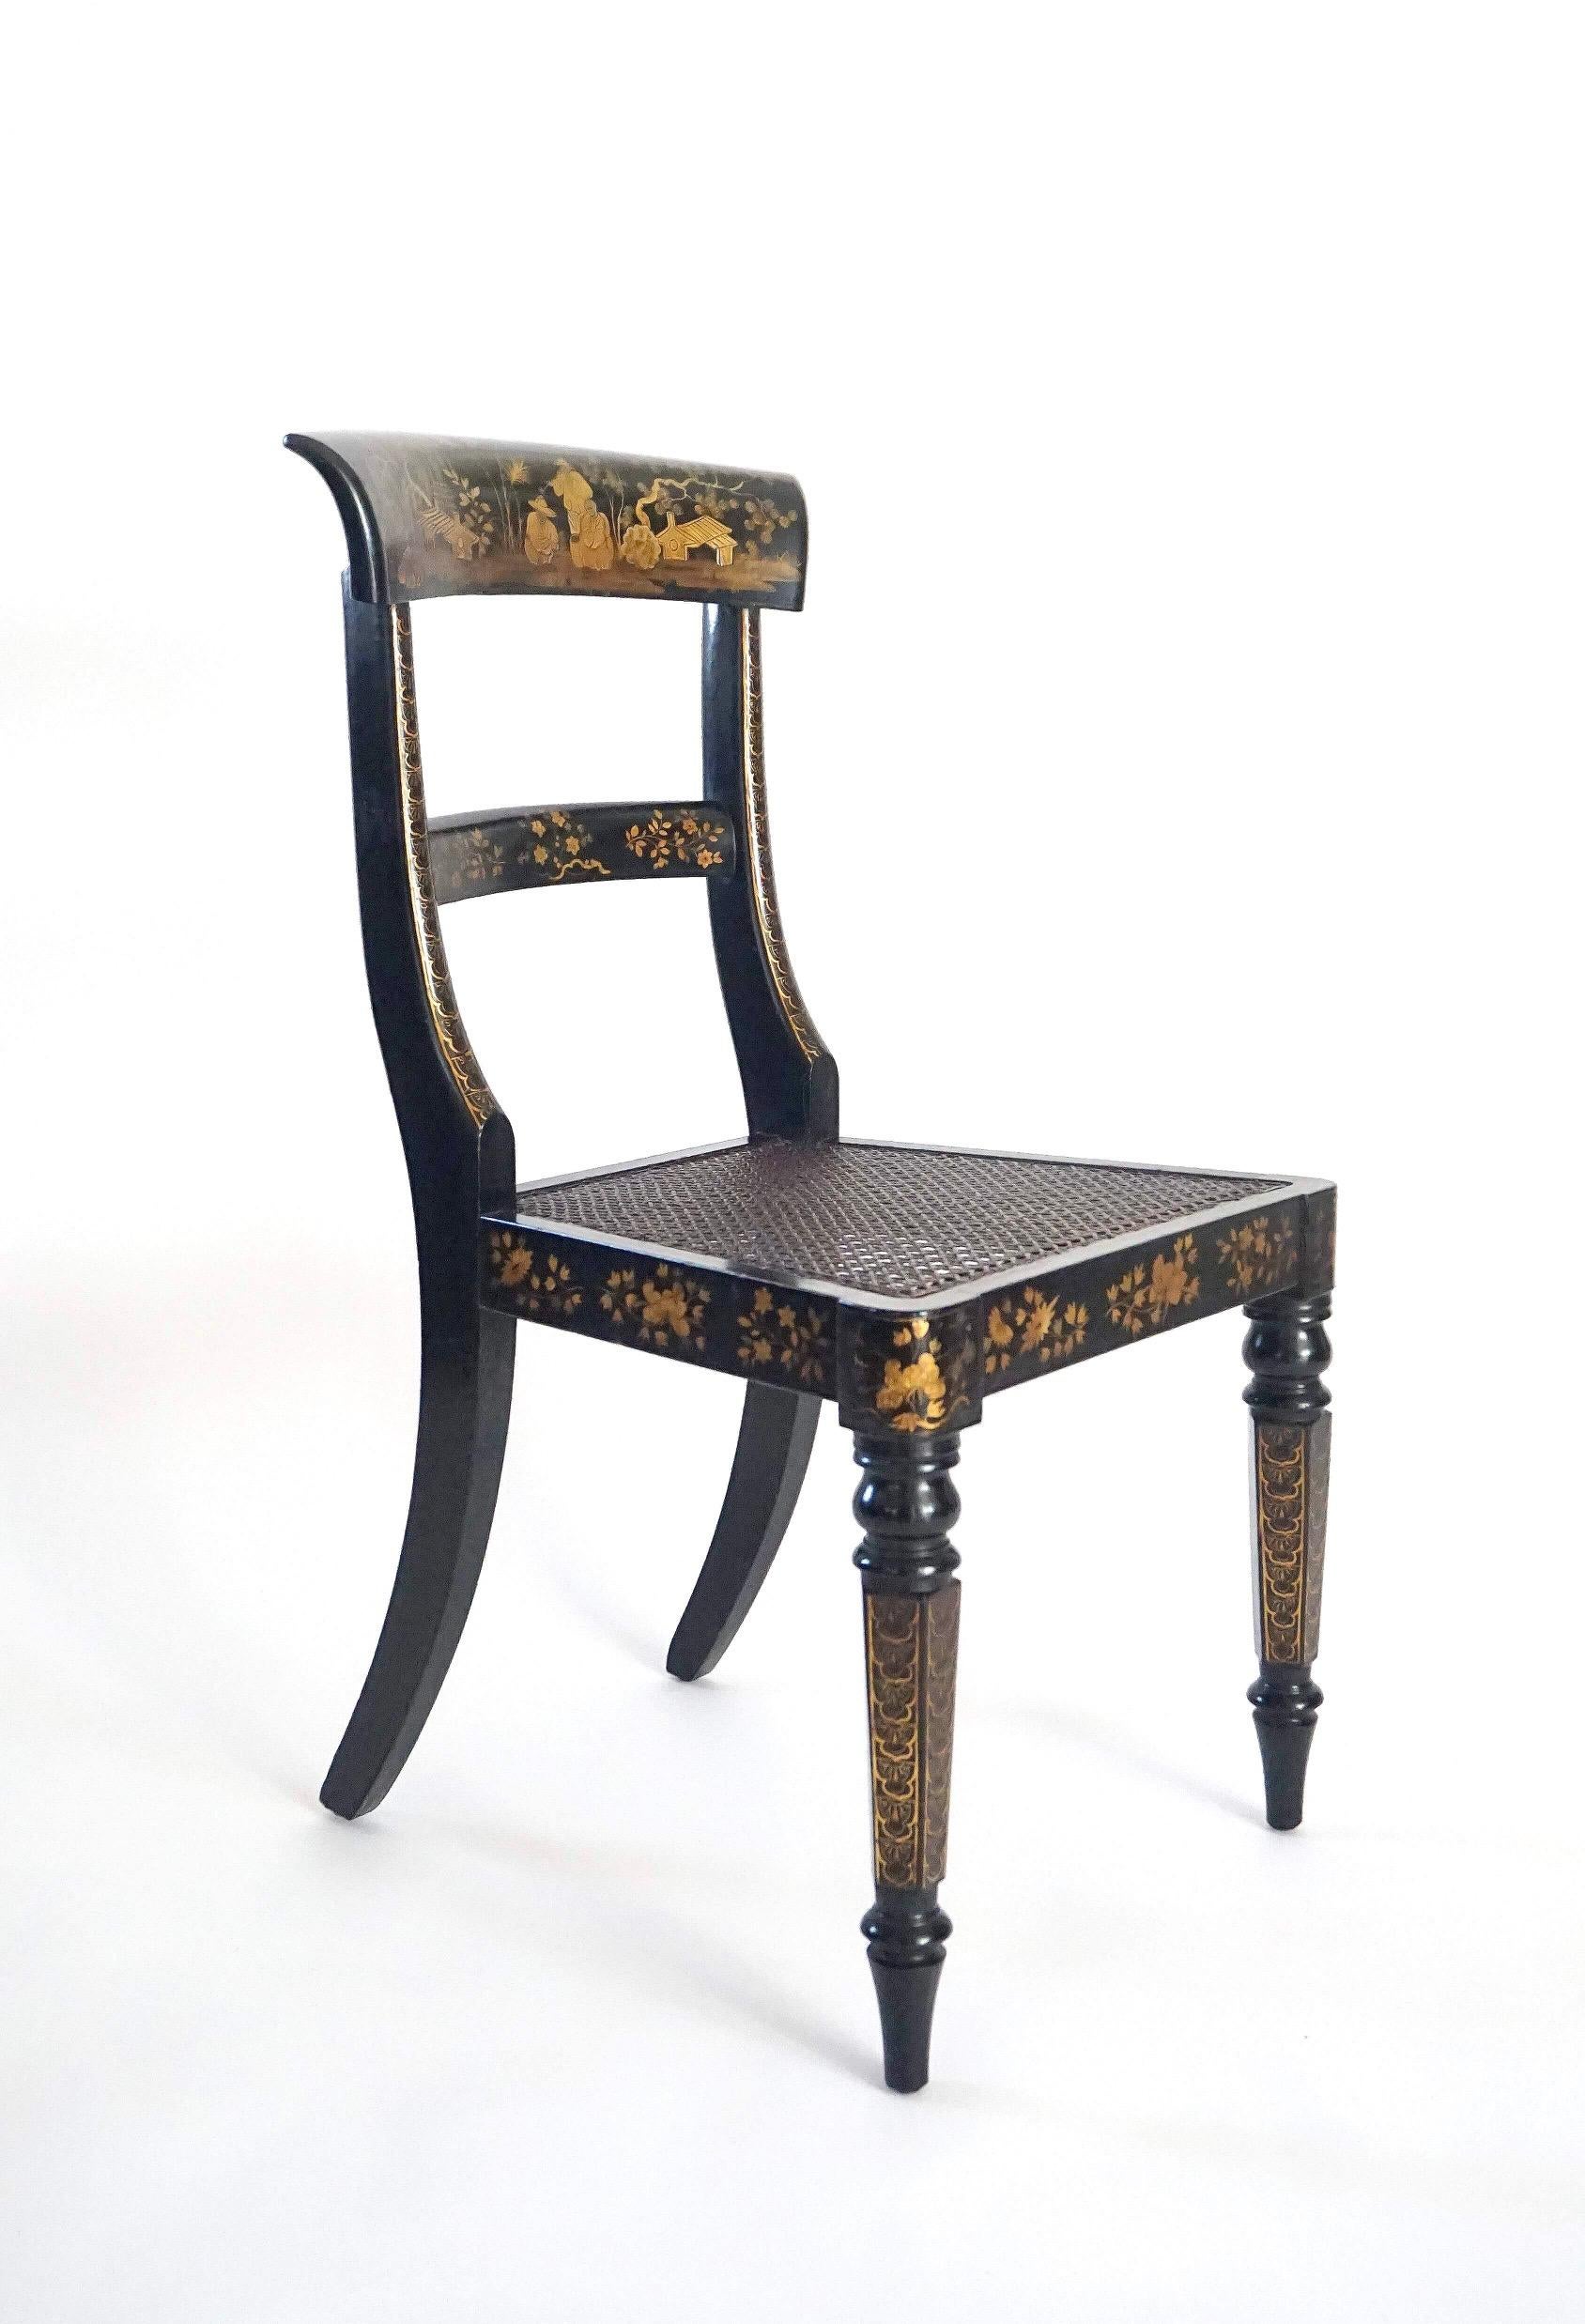 English Chinoiserie Chairs, Ex-Garvan Collection Yale University, circa 1835 For Sale 4